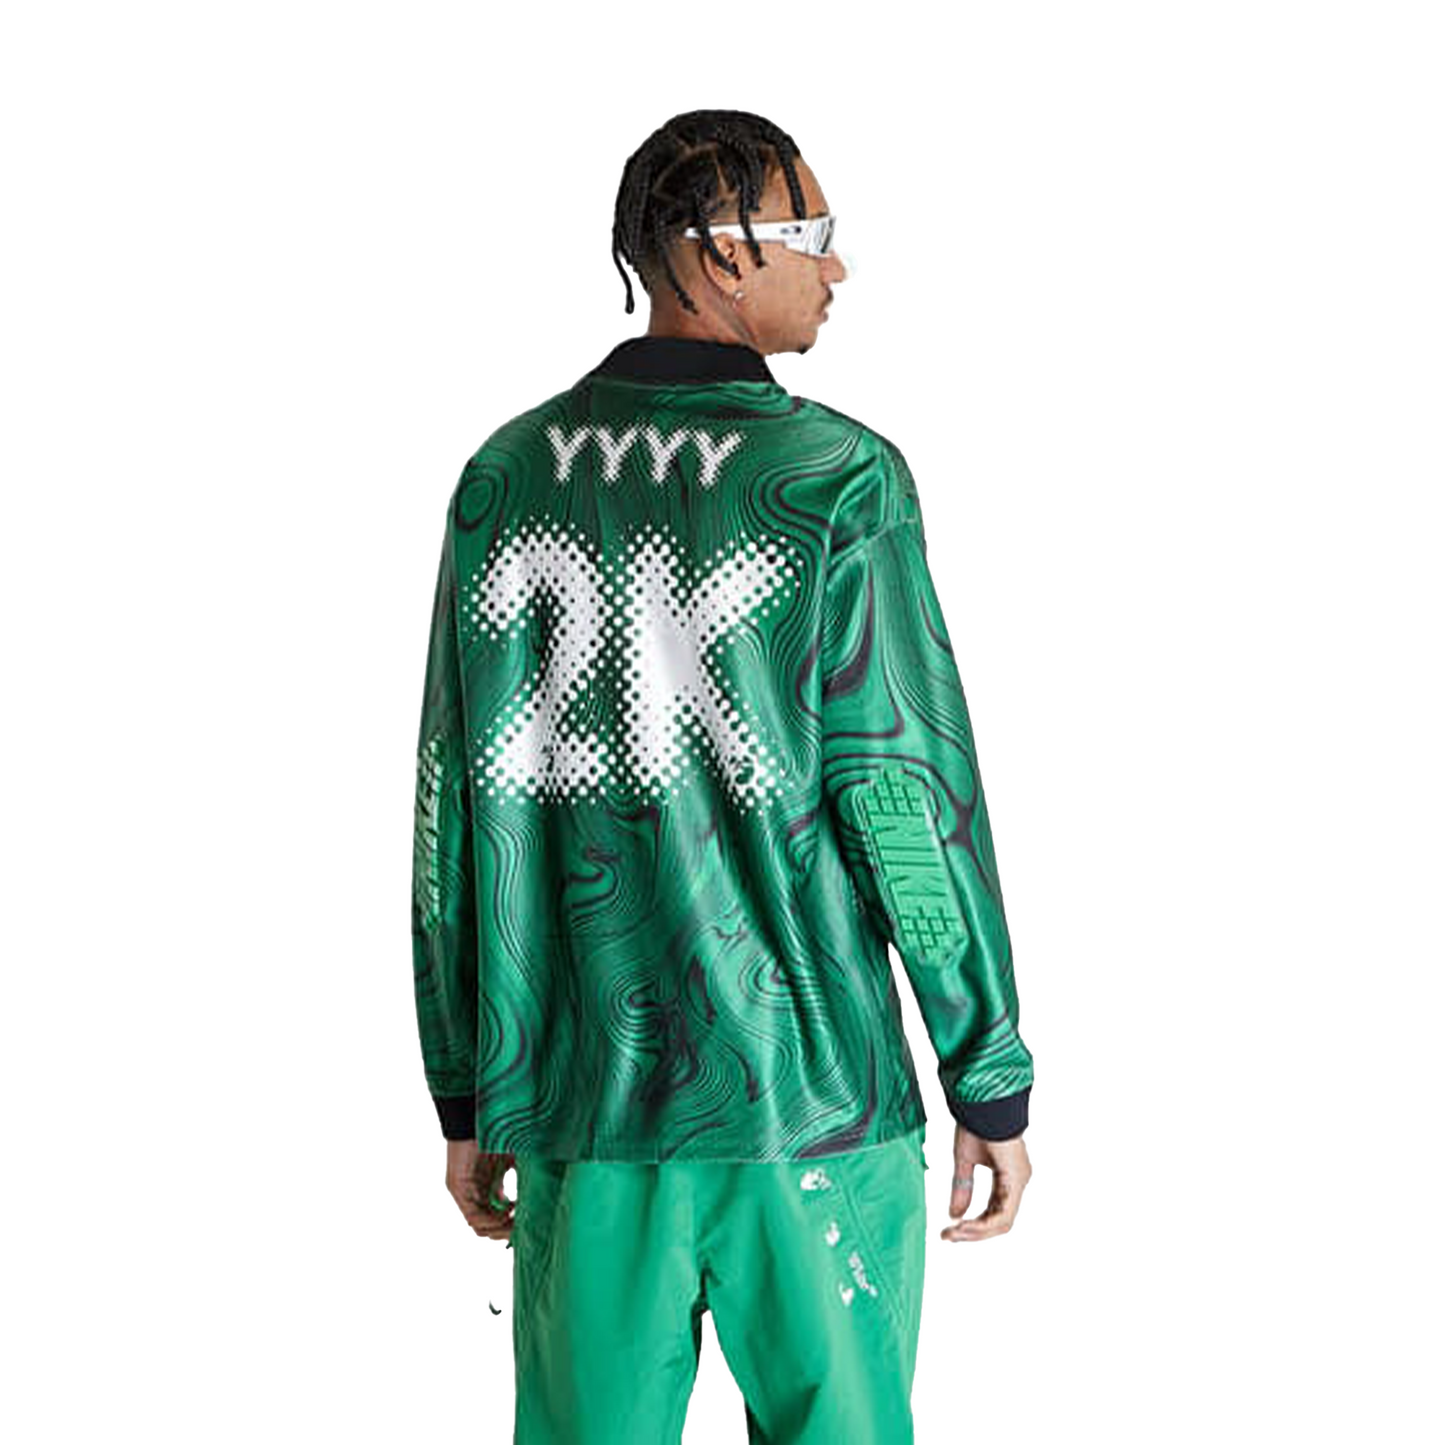 Nike x Off-White Allover Print Jersey Kelly Green